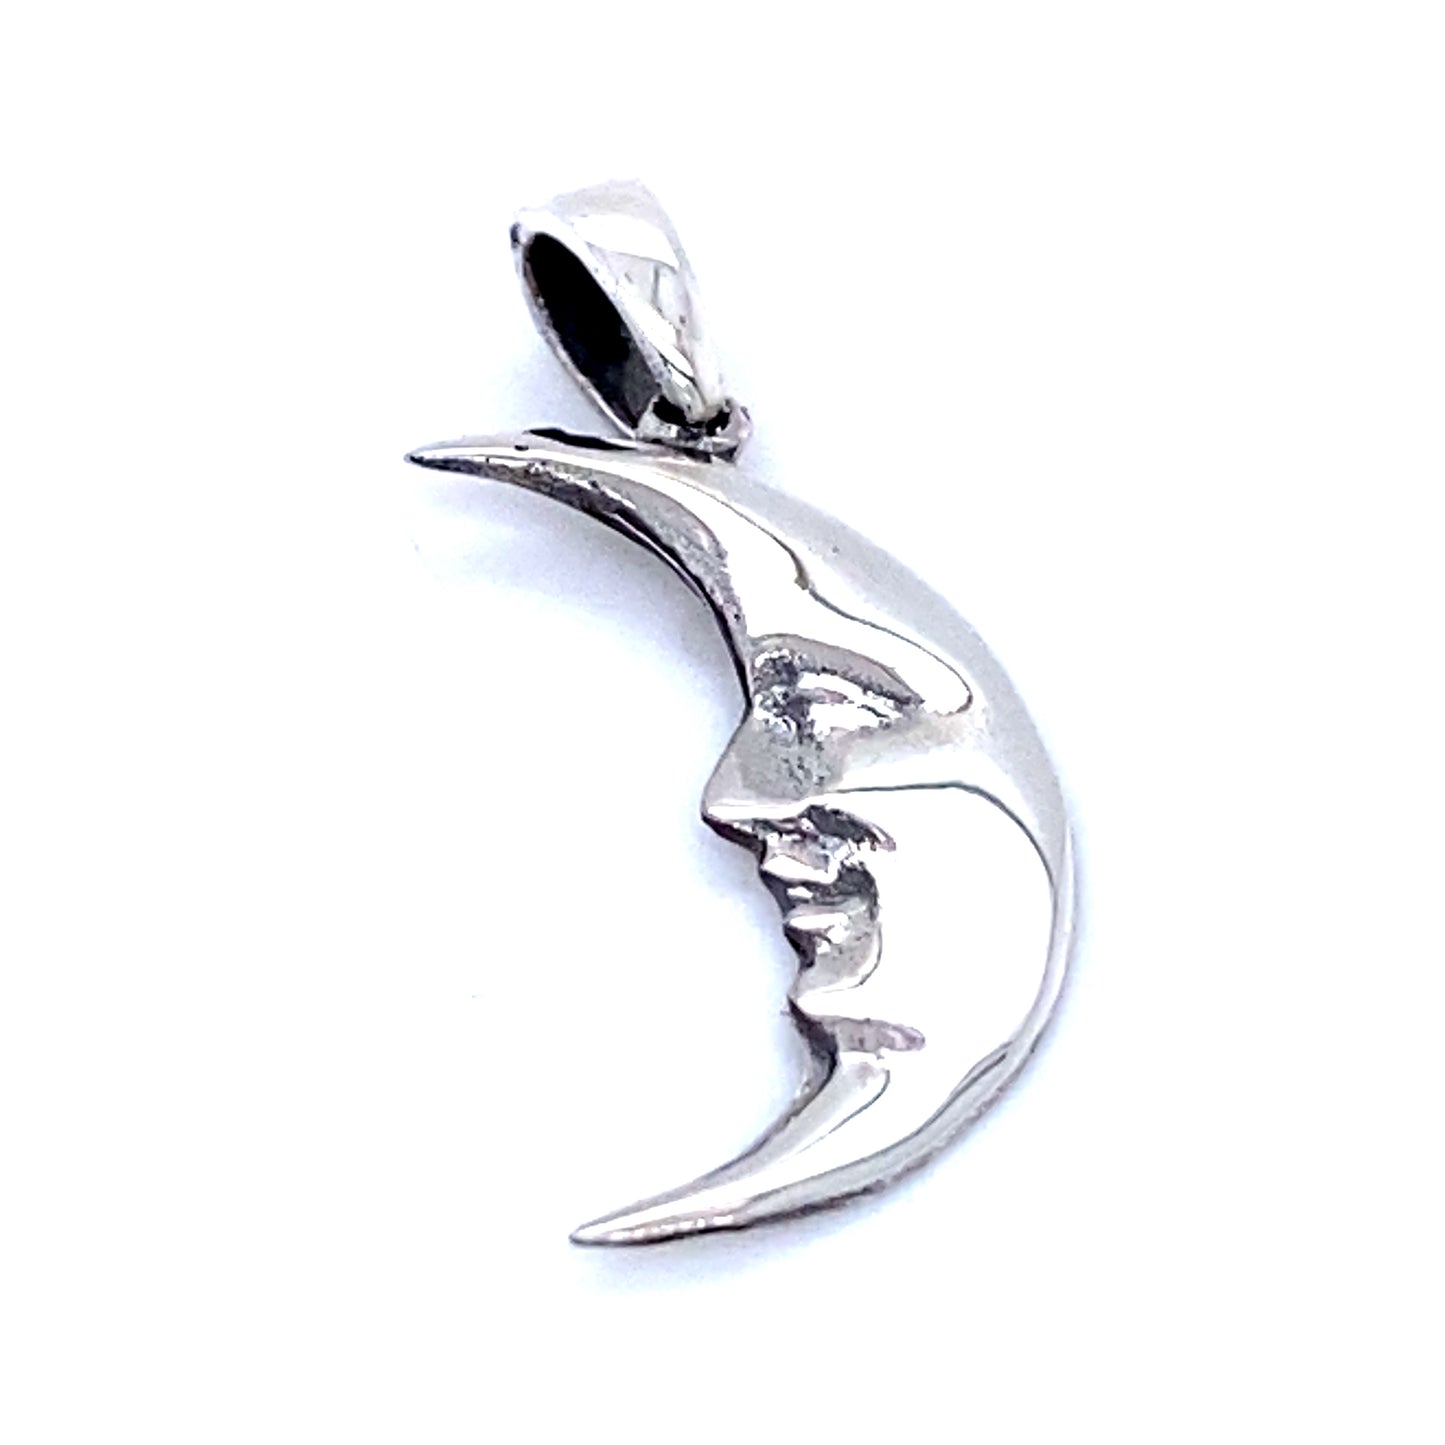 A Super Silver Crescent Man In The Moon Pendant with a face on it.